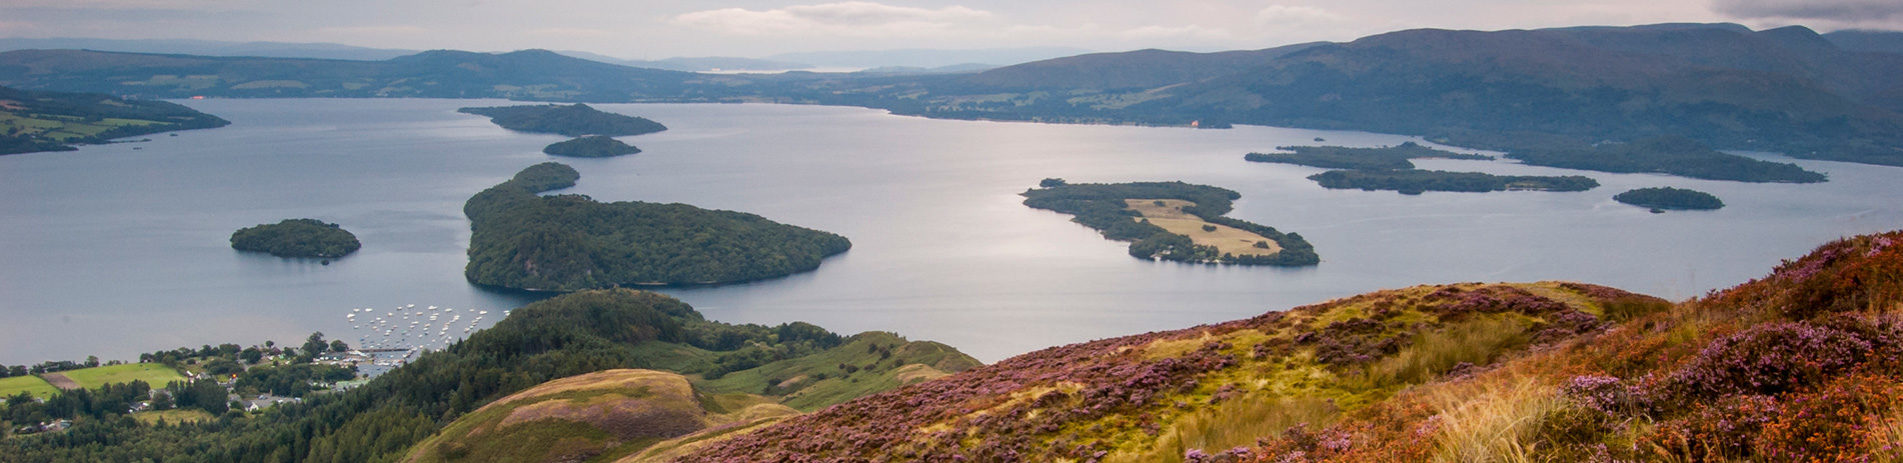 Highland Boundary Faultline view from Conic Hill over Loch Lomond Islands